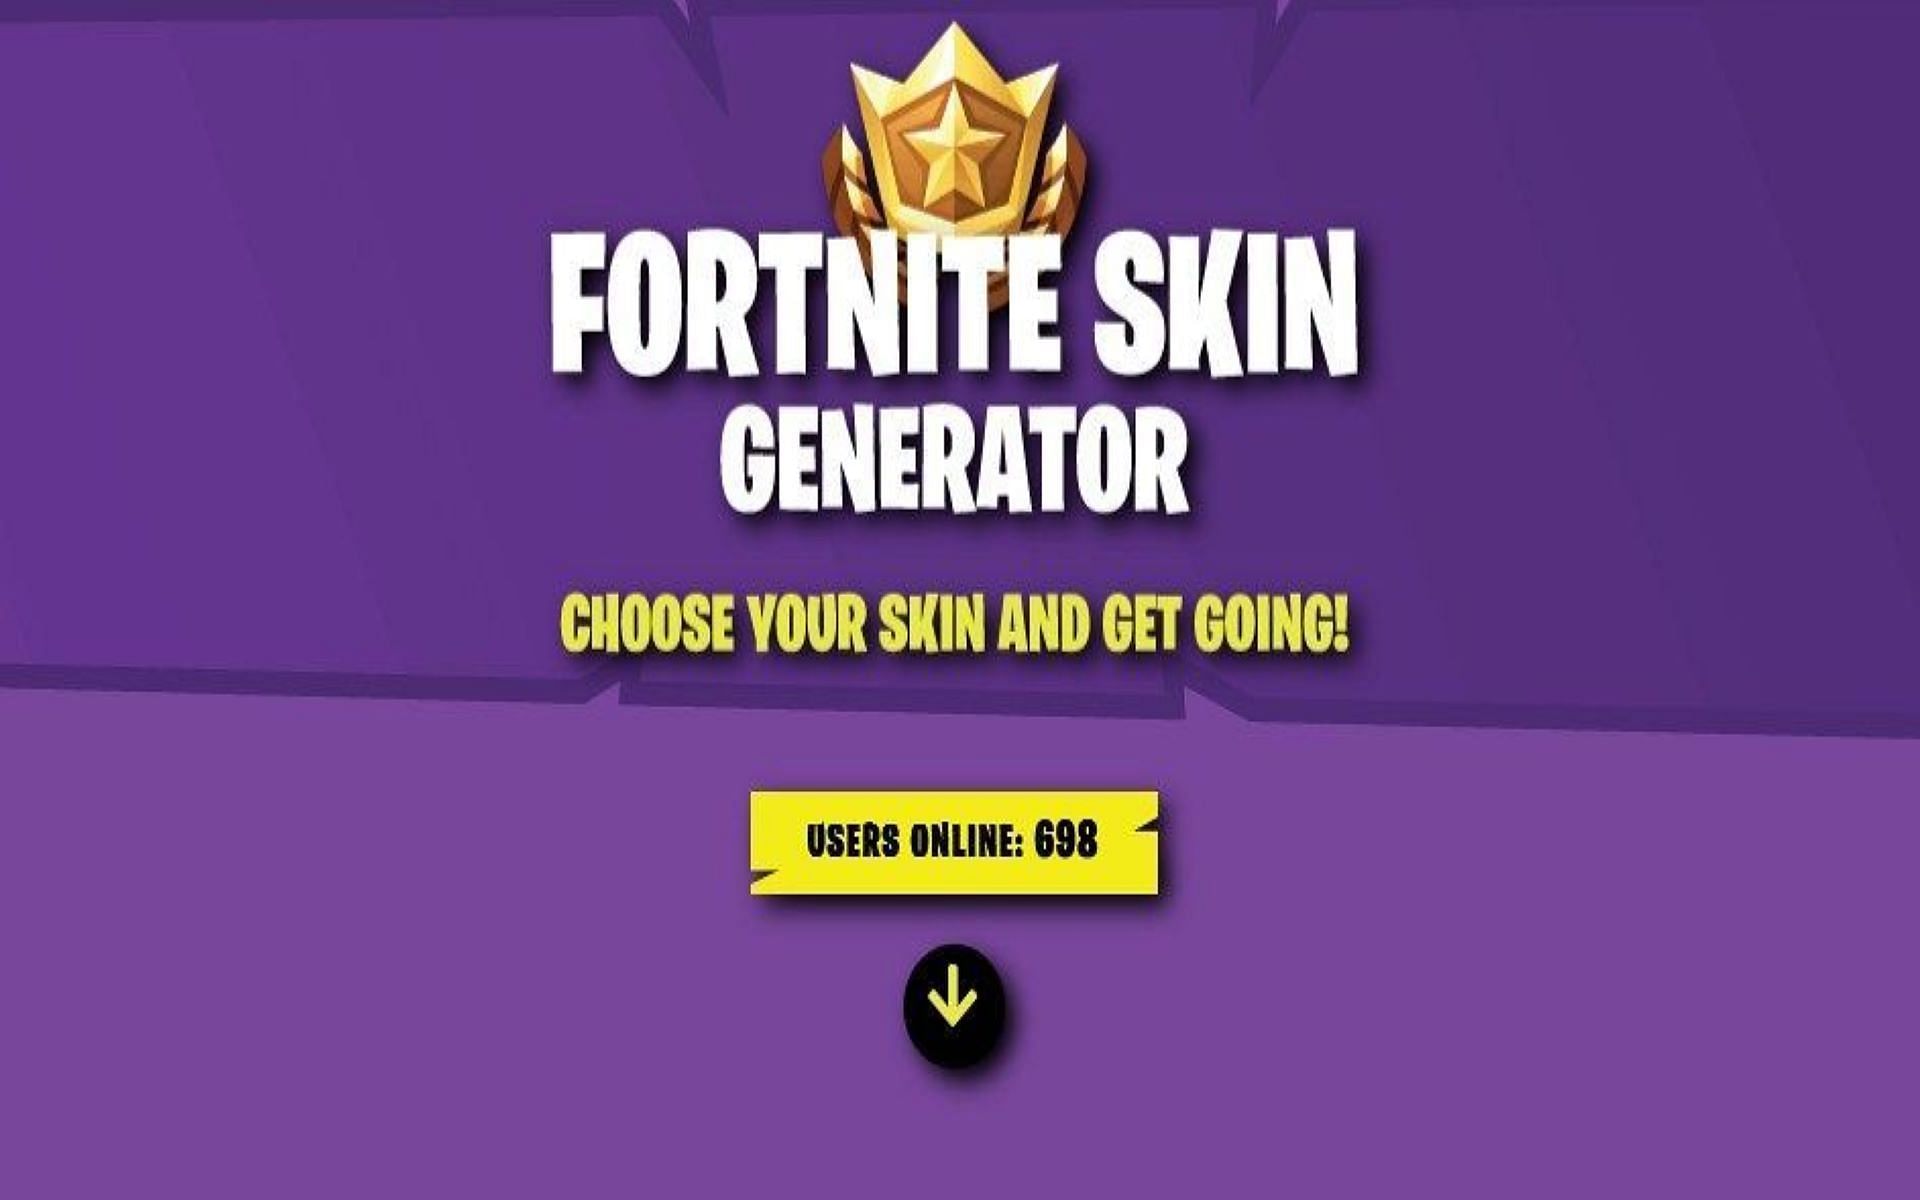 Fortnite Skin generators are fake and can even harm players (Image via Pinterest)